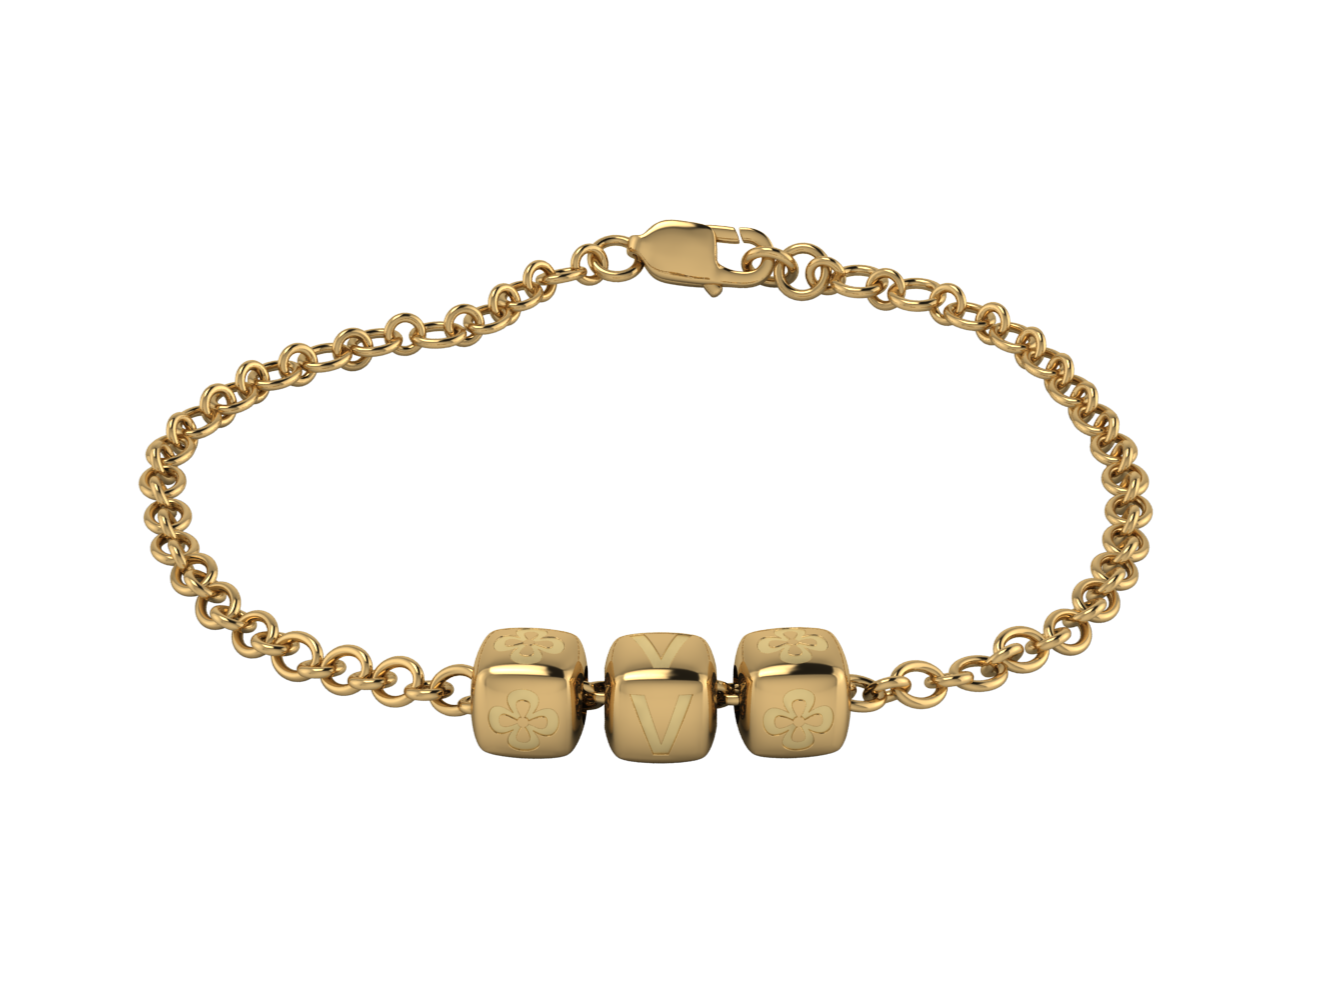 Sterling Silver Rakhi Bracelet 18 Kt Gold Plated With Plain Dice Cubes For All